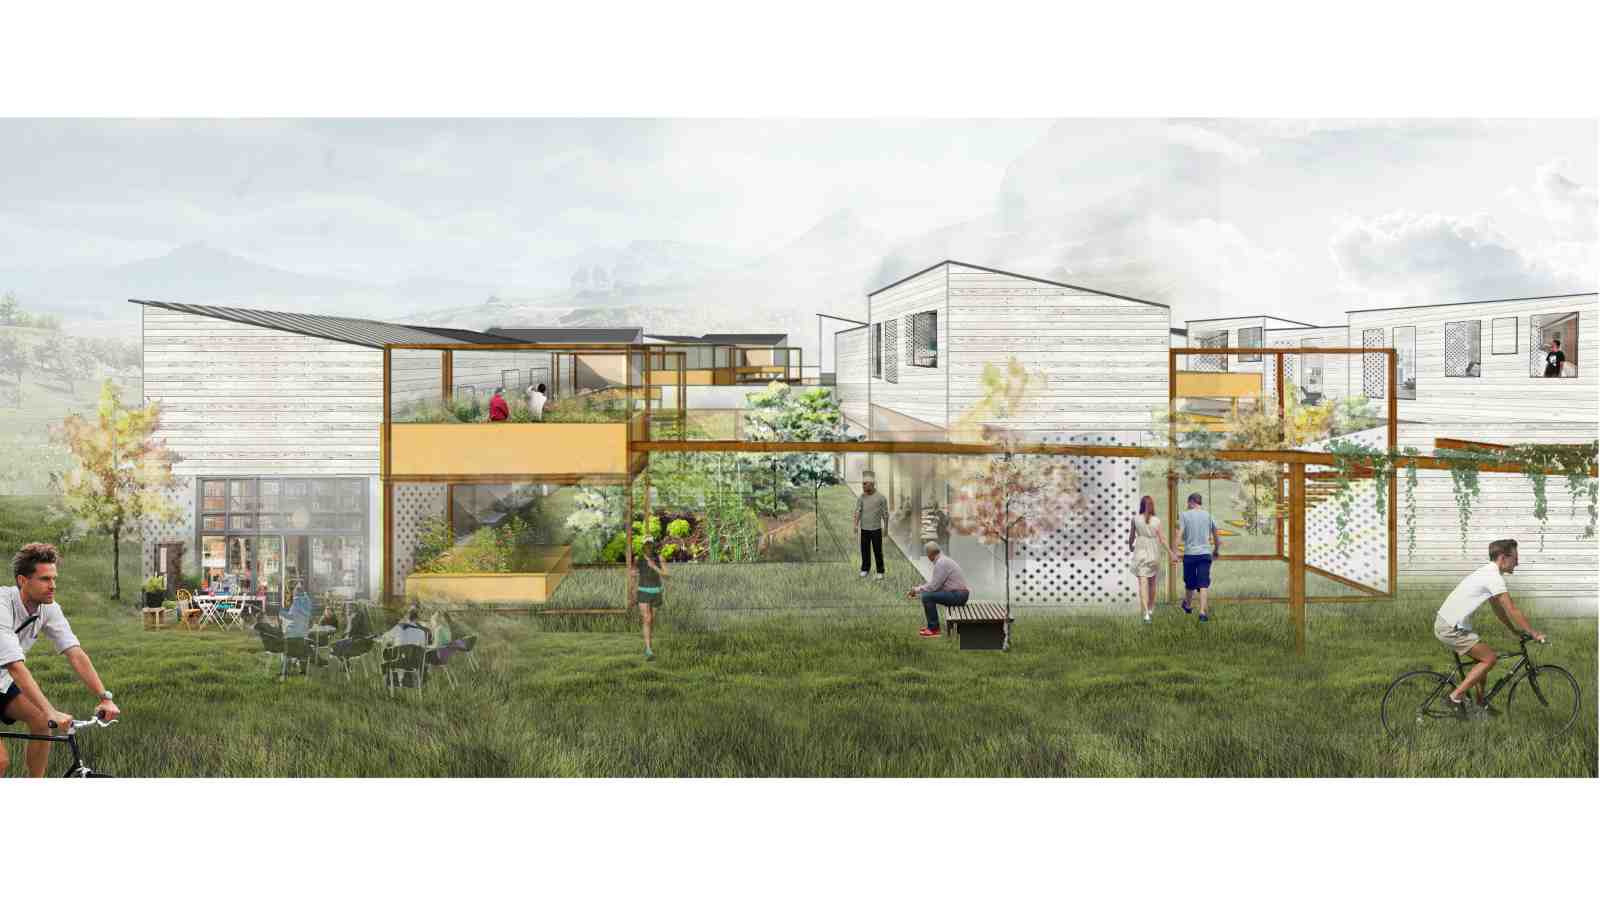 A render of the groups competition entry showing buildings in a U shape with a court yard in the centre with vegetable garden.